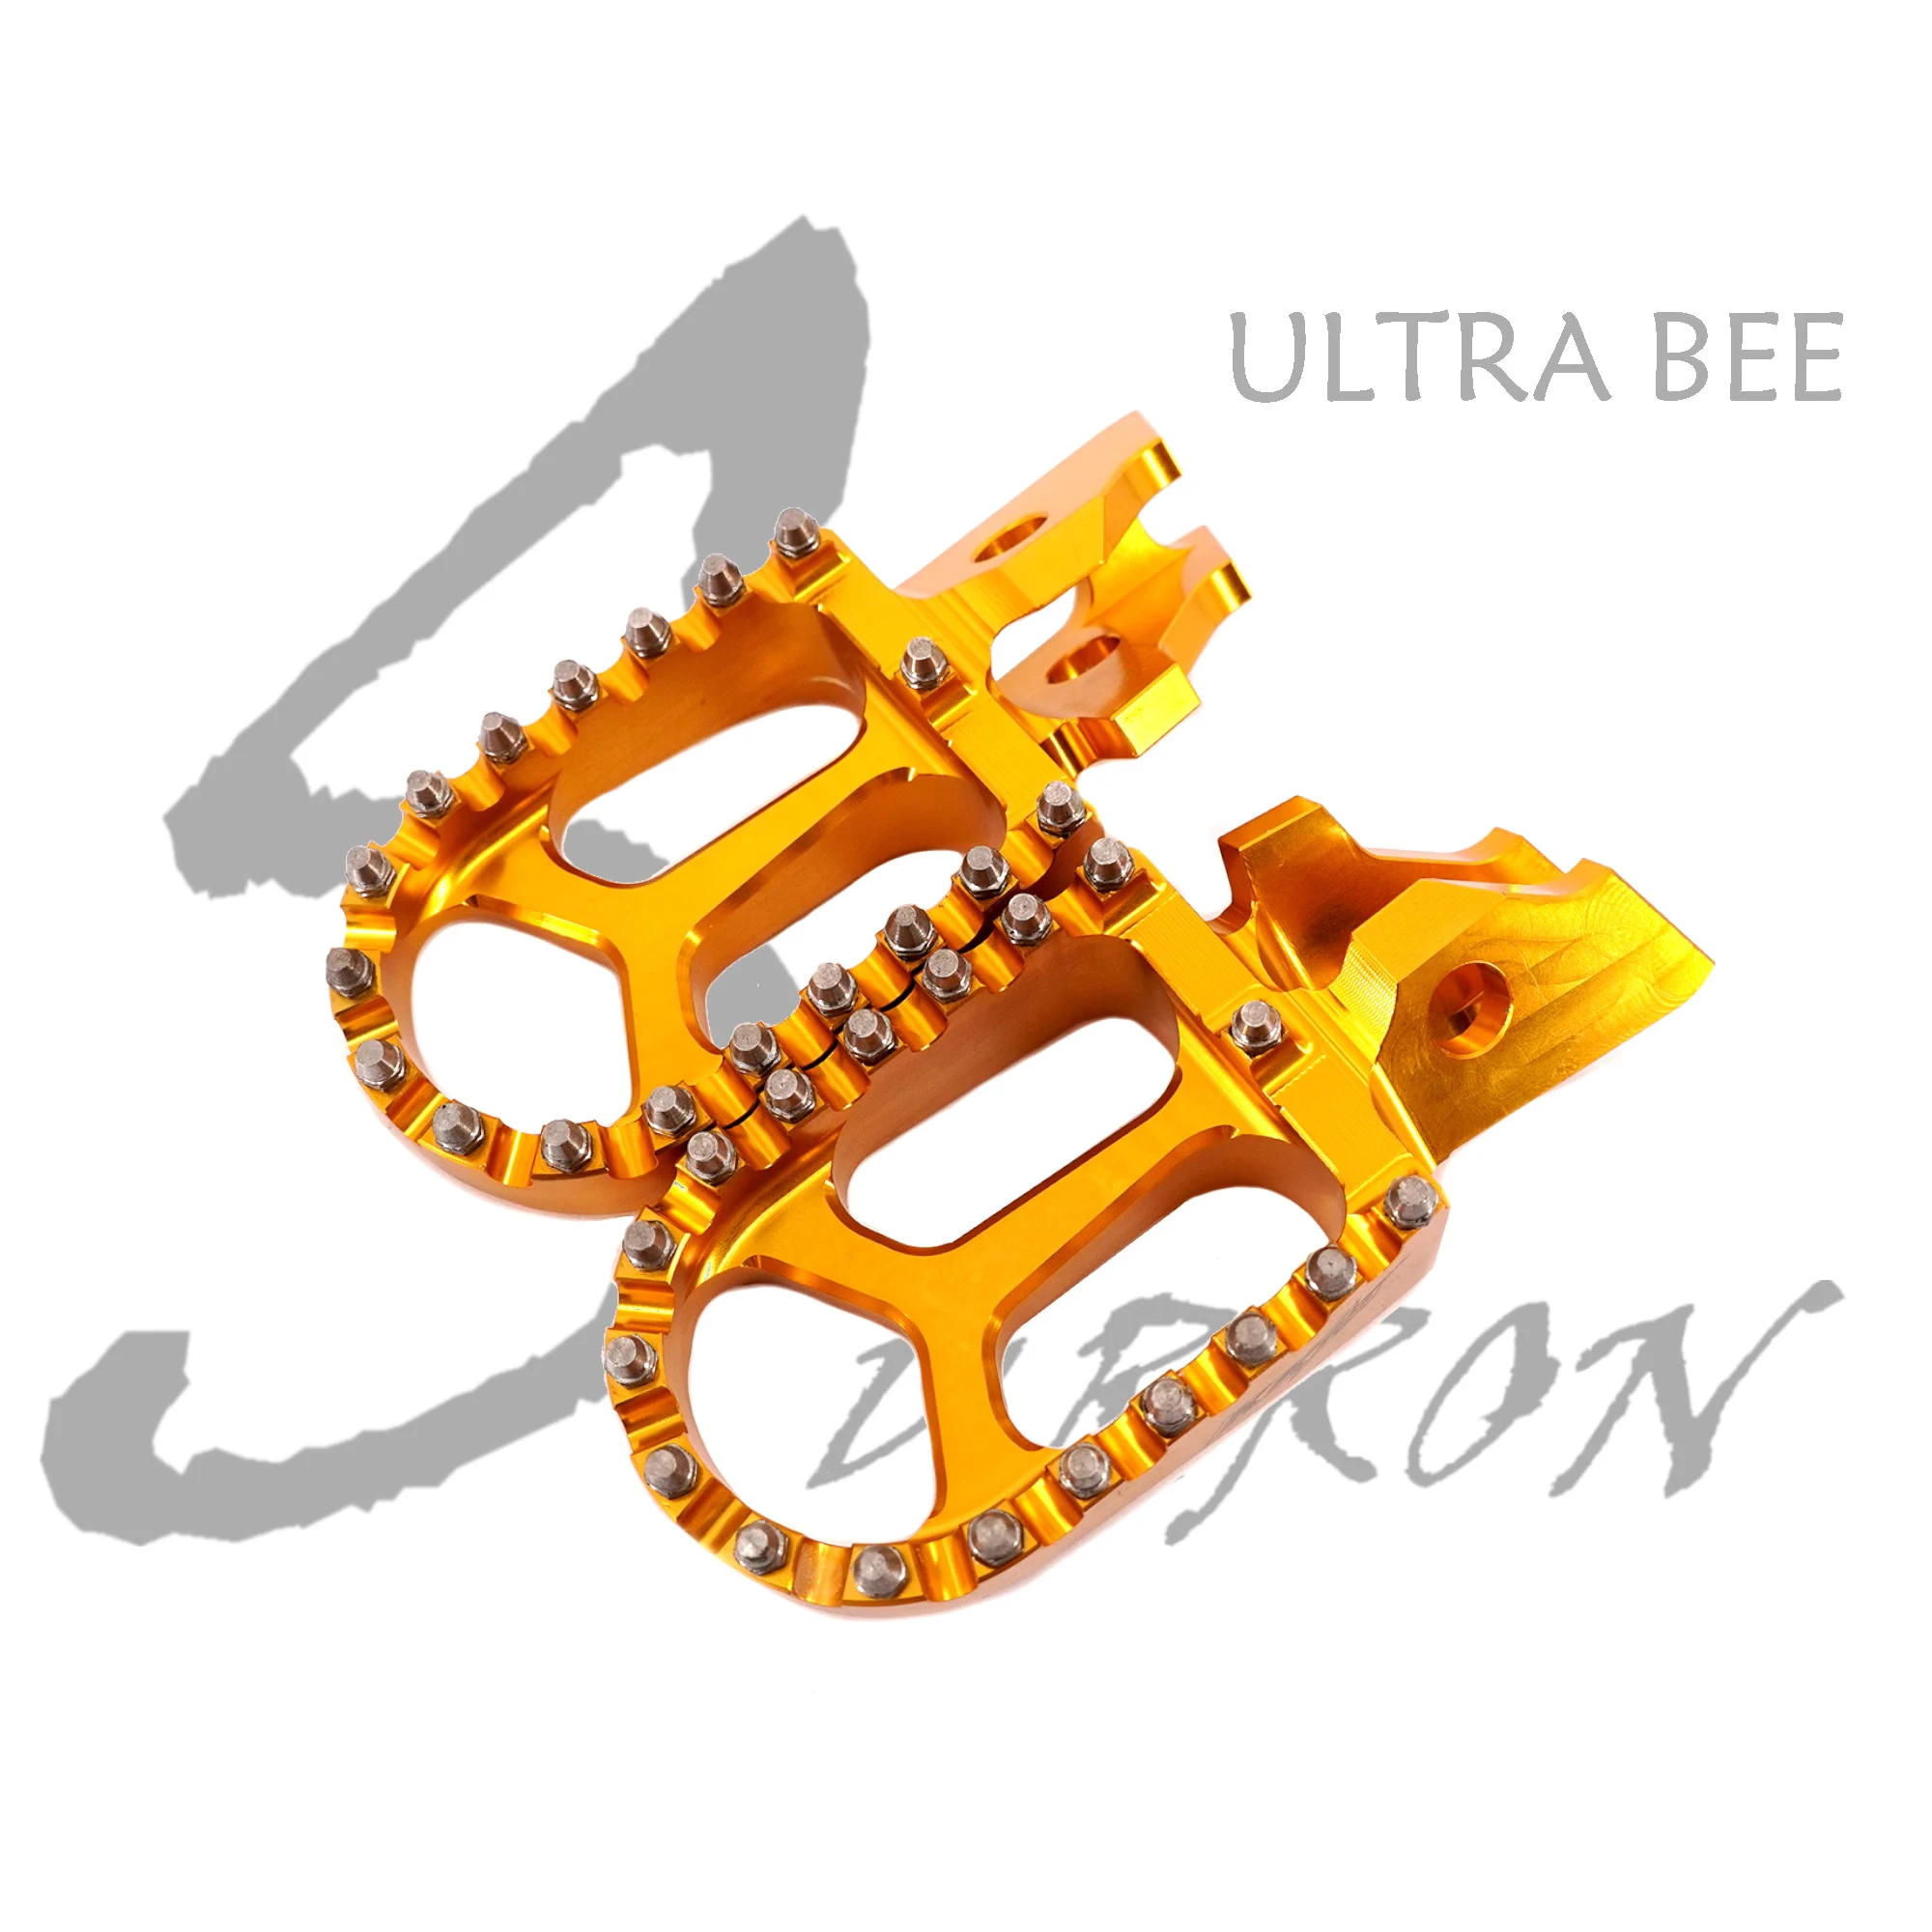 

KKE Footpegs Billet Foot Rest for SURRON Ultra bee modified Pedals UB Mod wide foot pegs